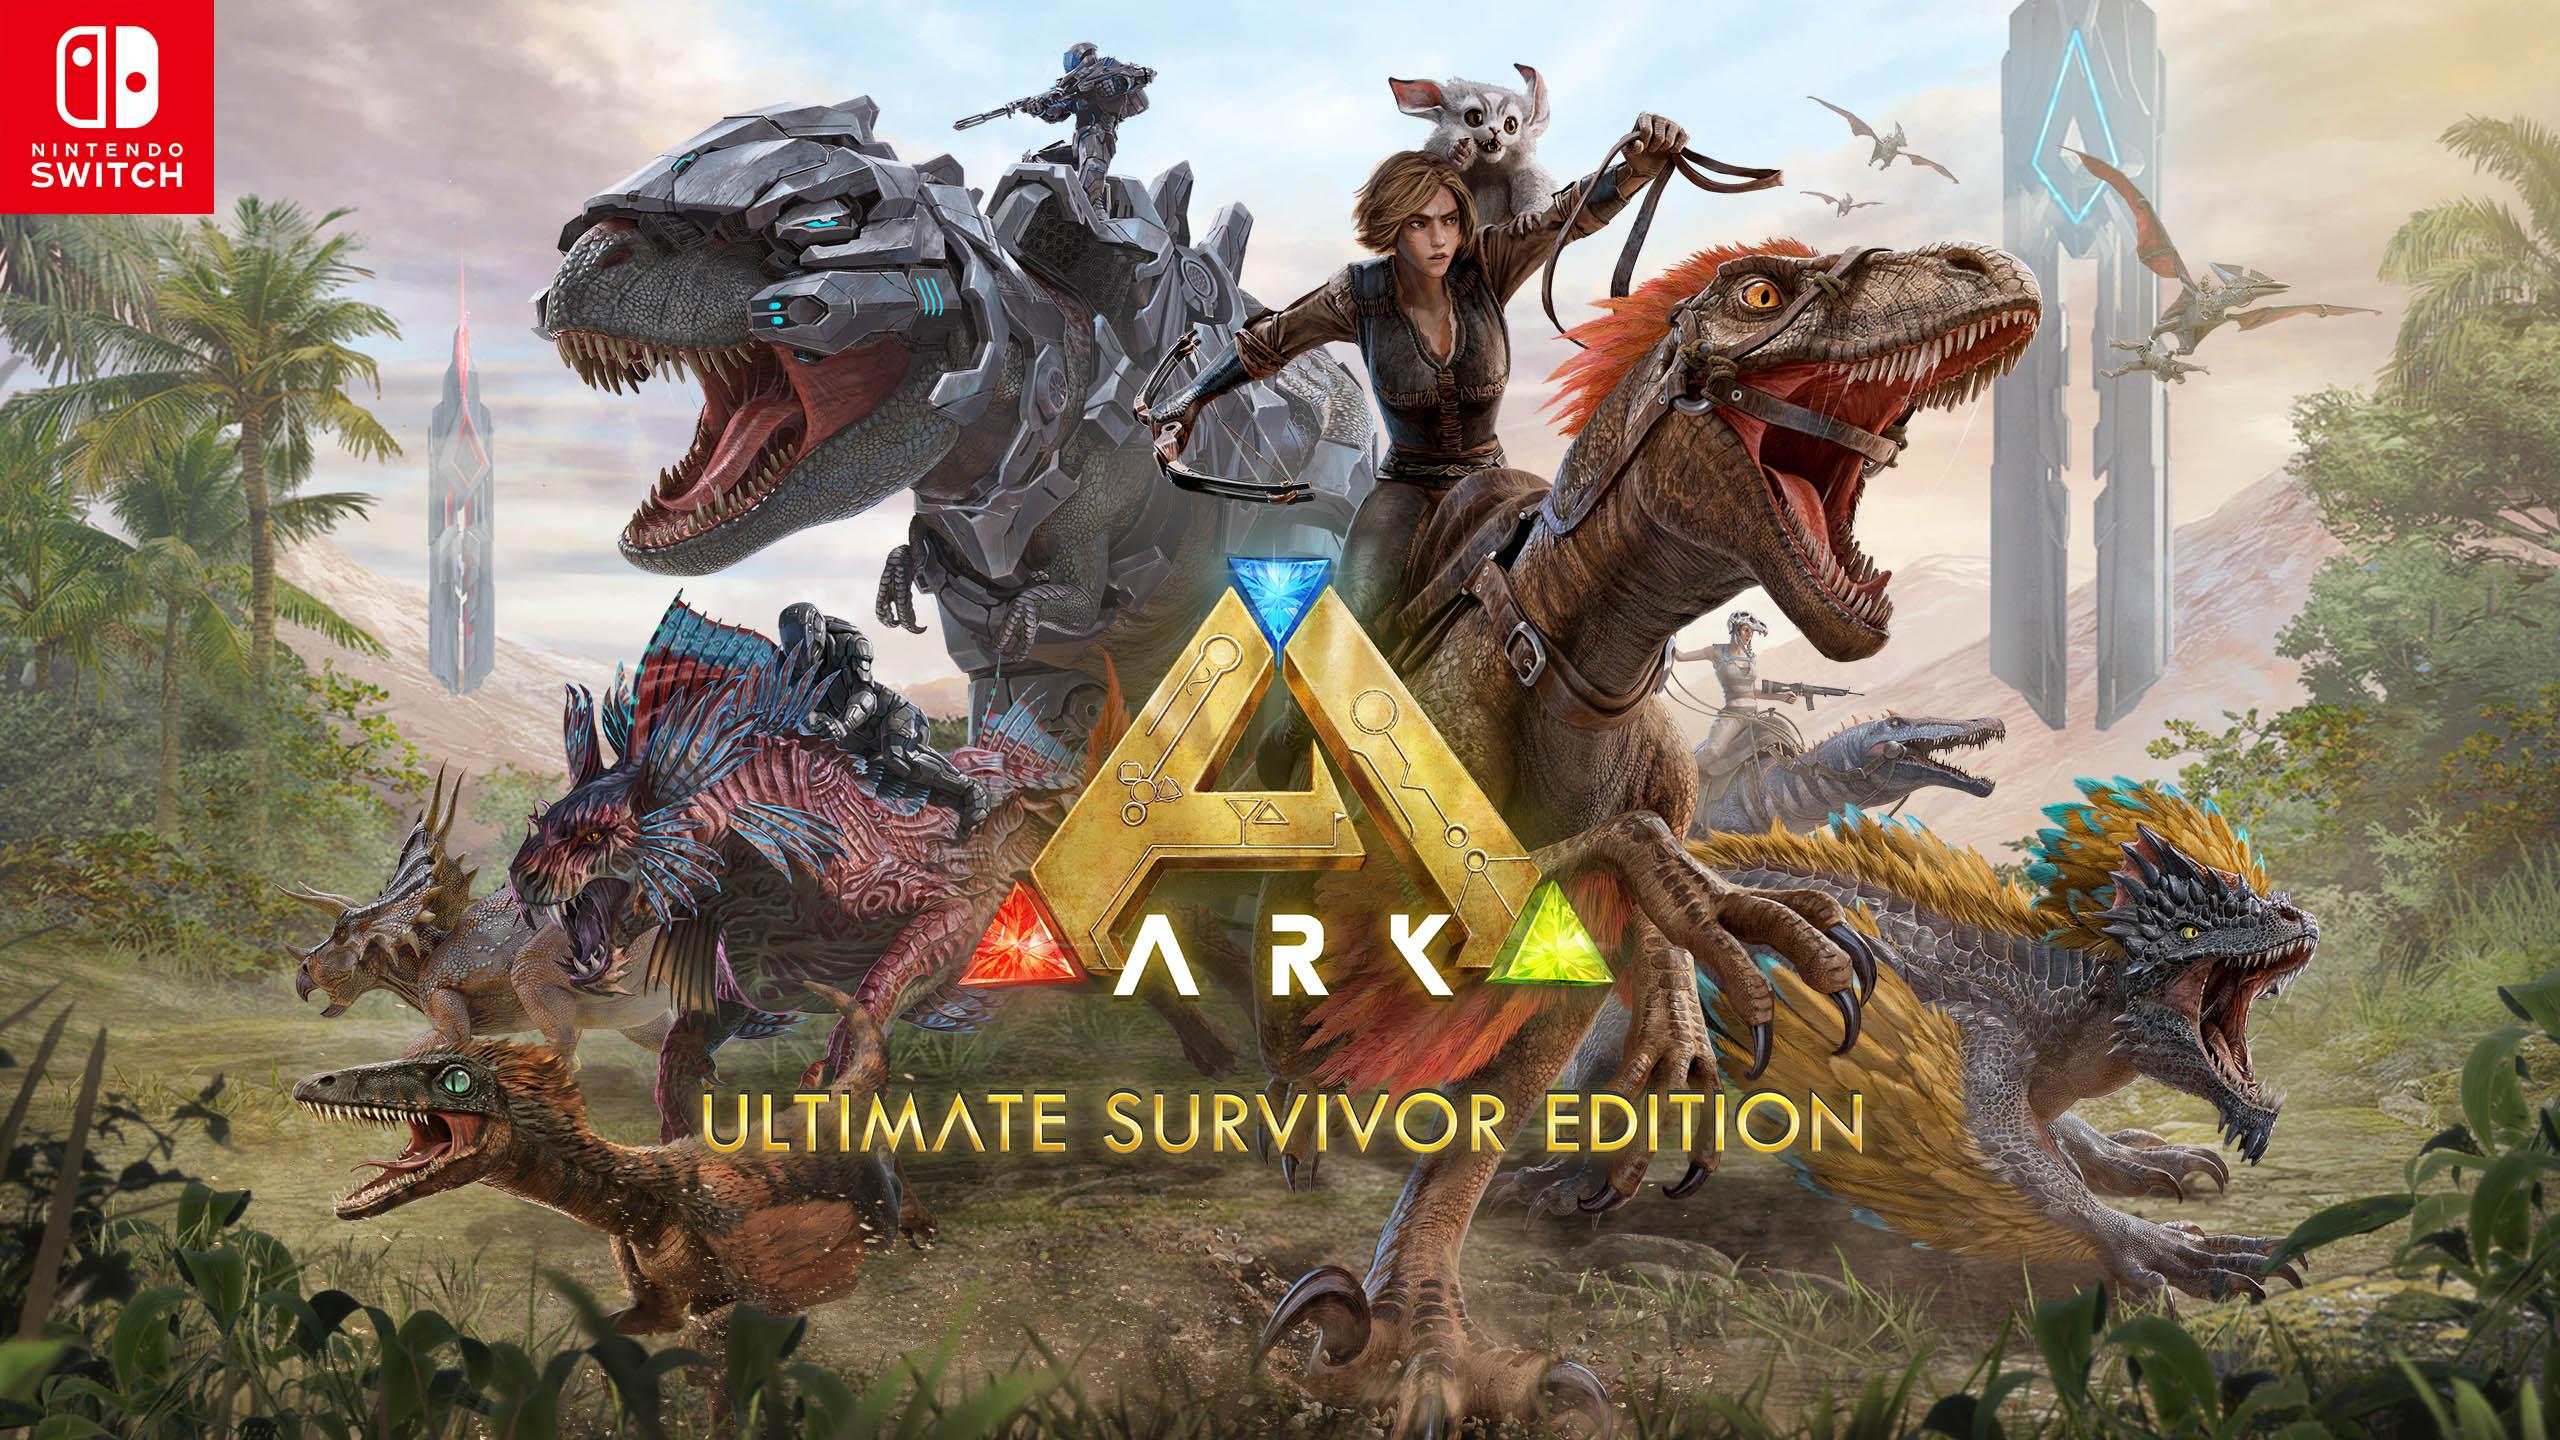 Ark 2: release date speculation, platforms, trailers, gameplay, and more